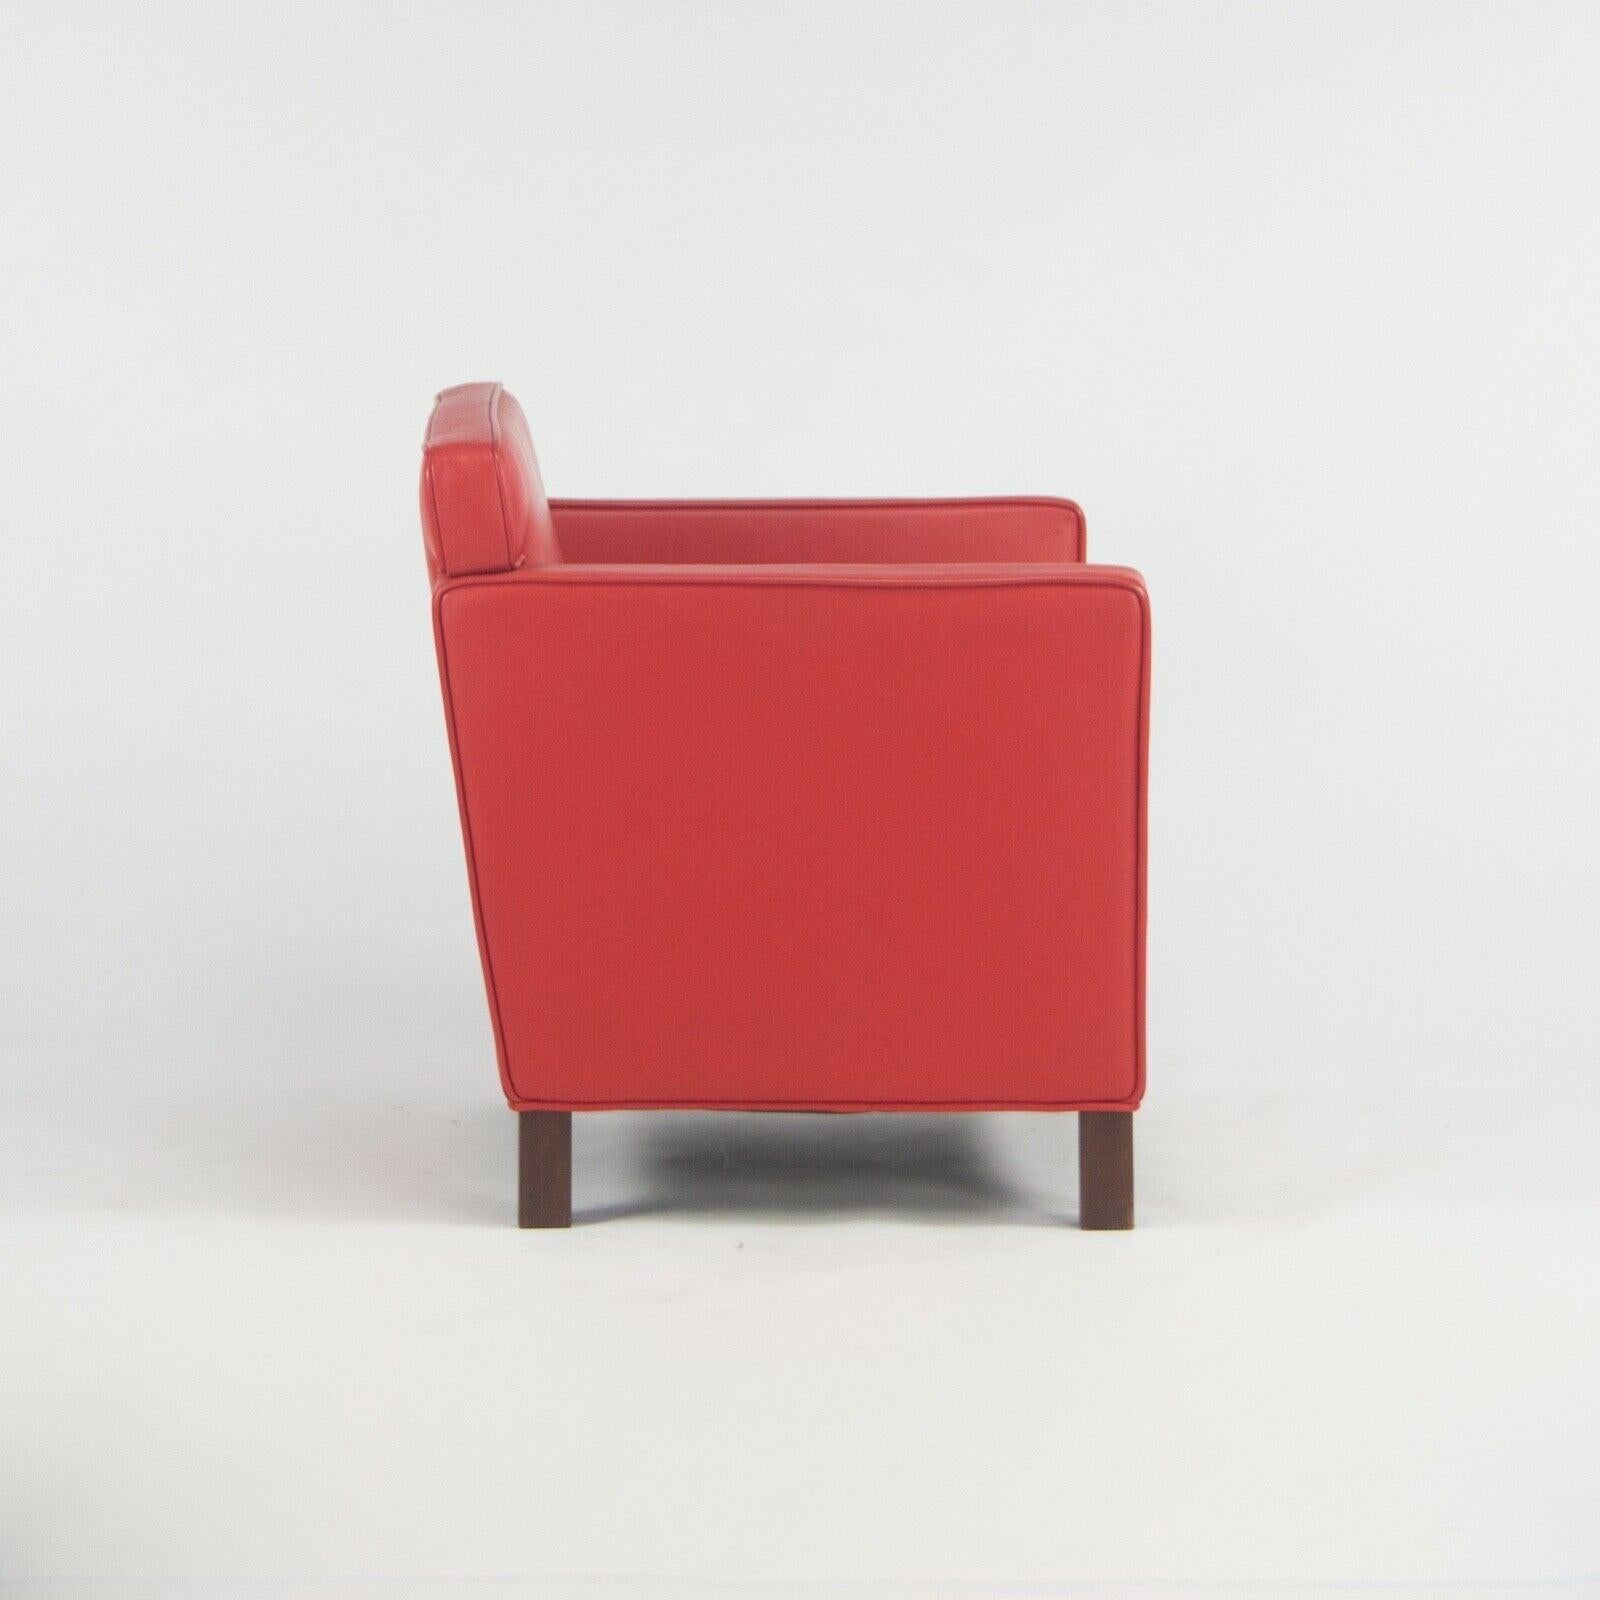 American C. 2009 Pair of Mies Van Der Rohe Knoll Krefeld Lounge Chairs in Red Leather For Sale